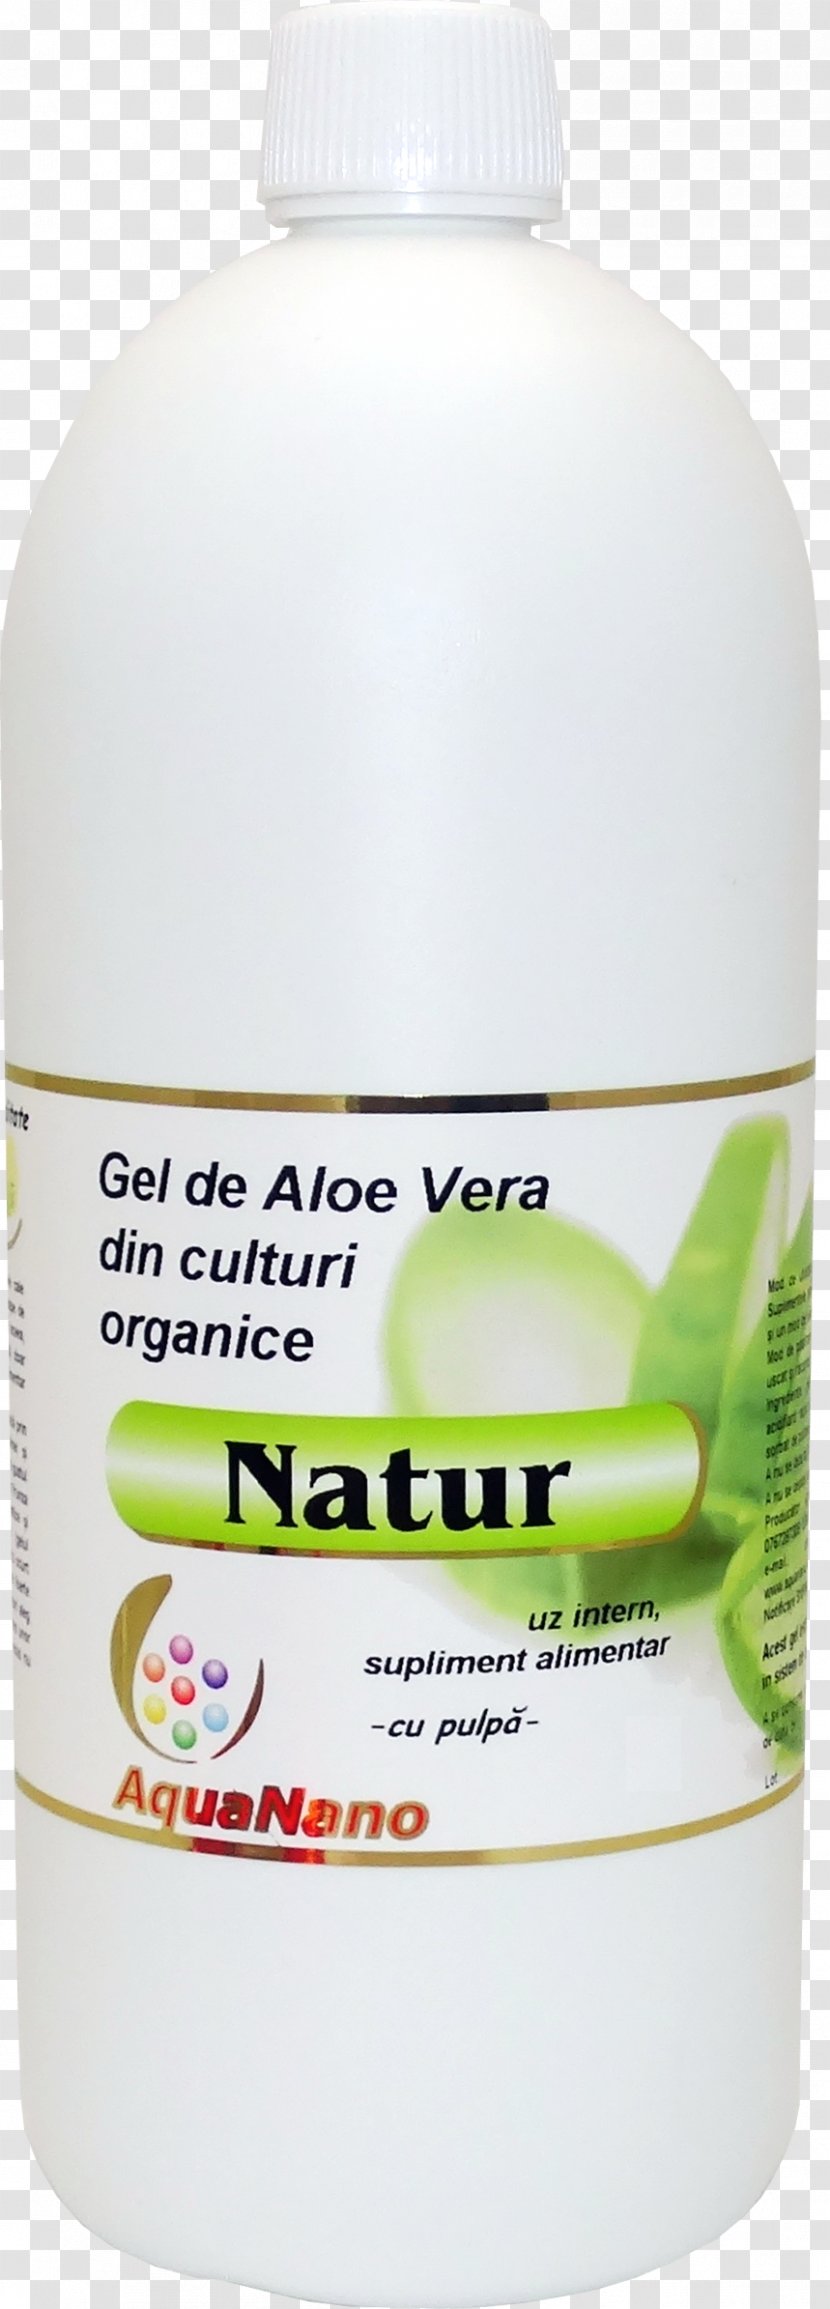 Lotion Product - Aloe Transparent PNG